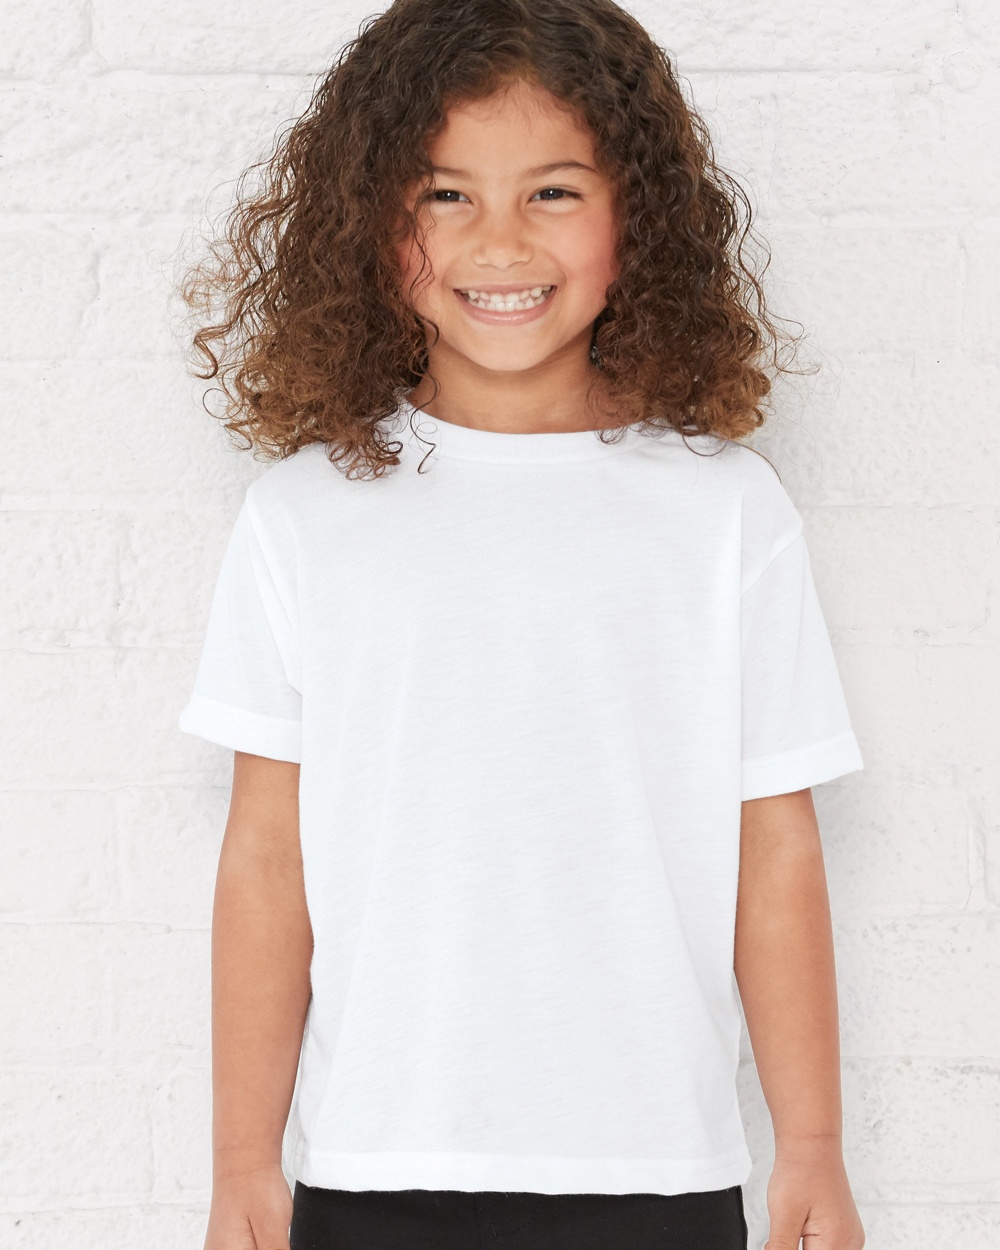 Sublivie 1310 Toddler Sublimation Polyester T-Shirt White 4T